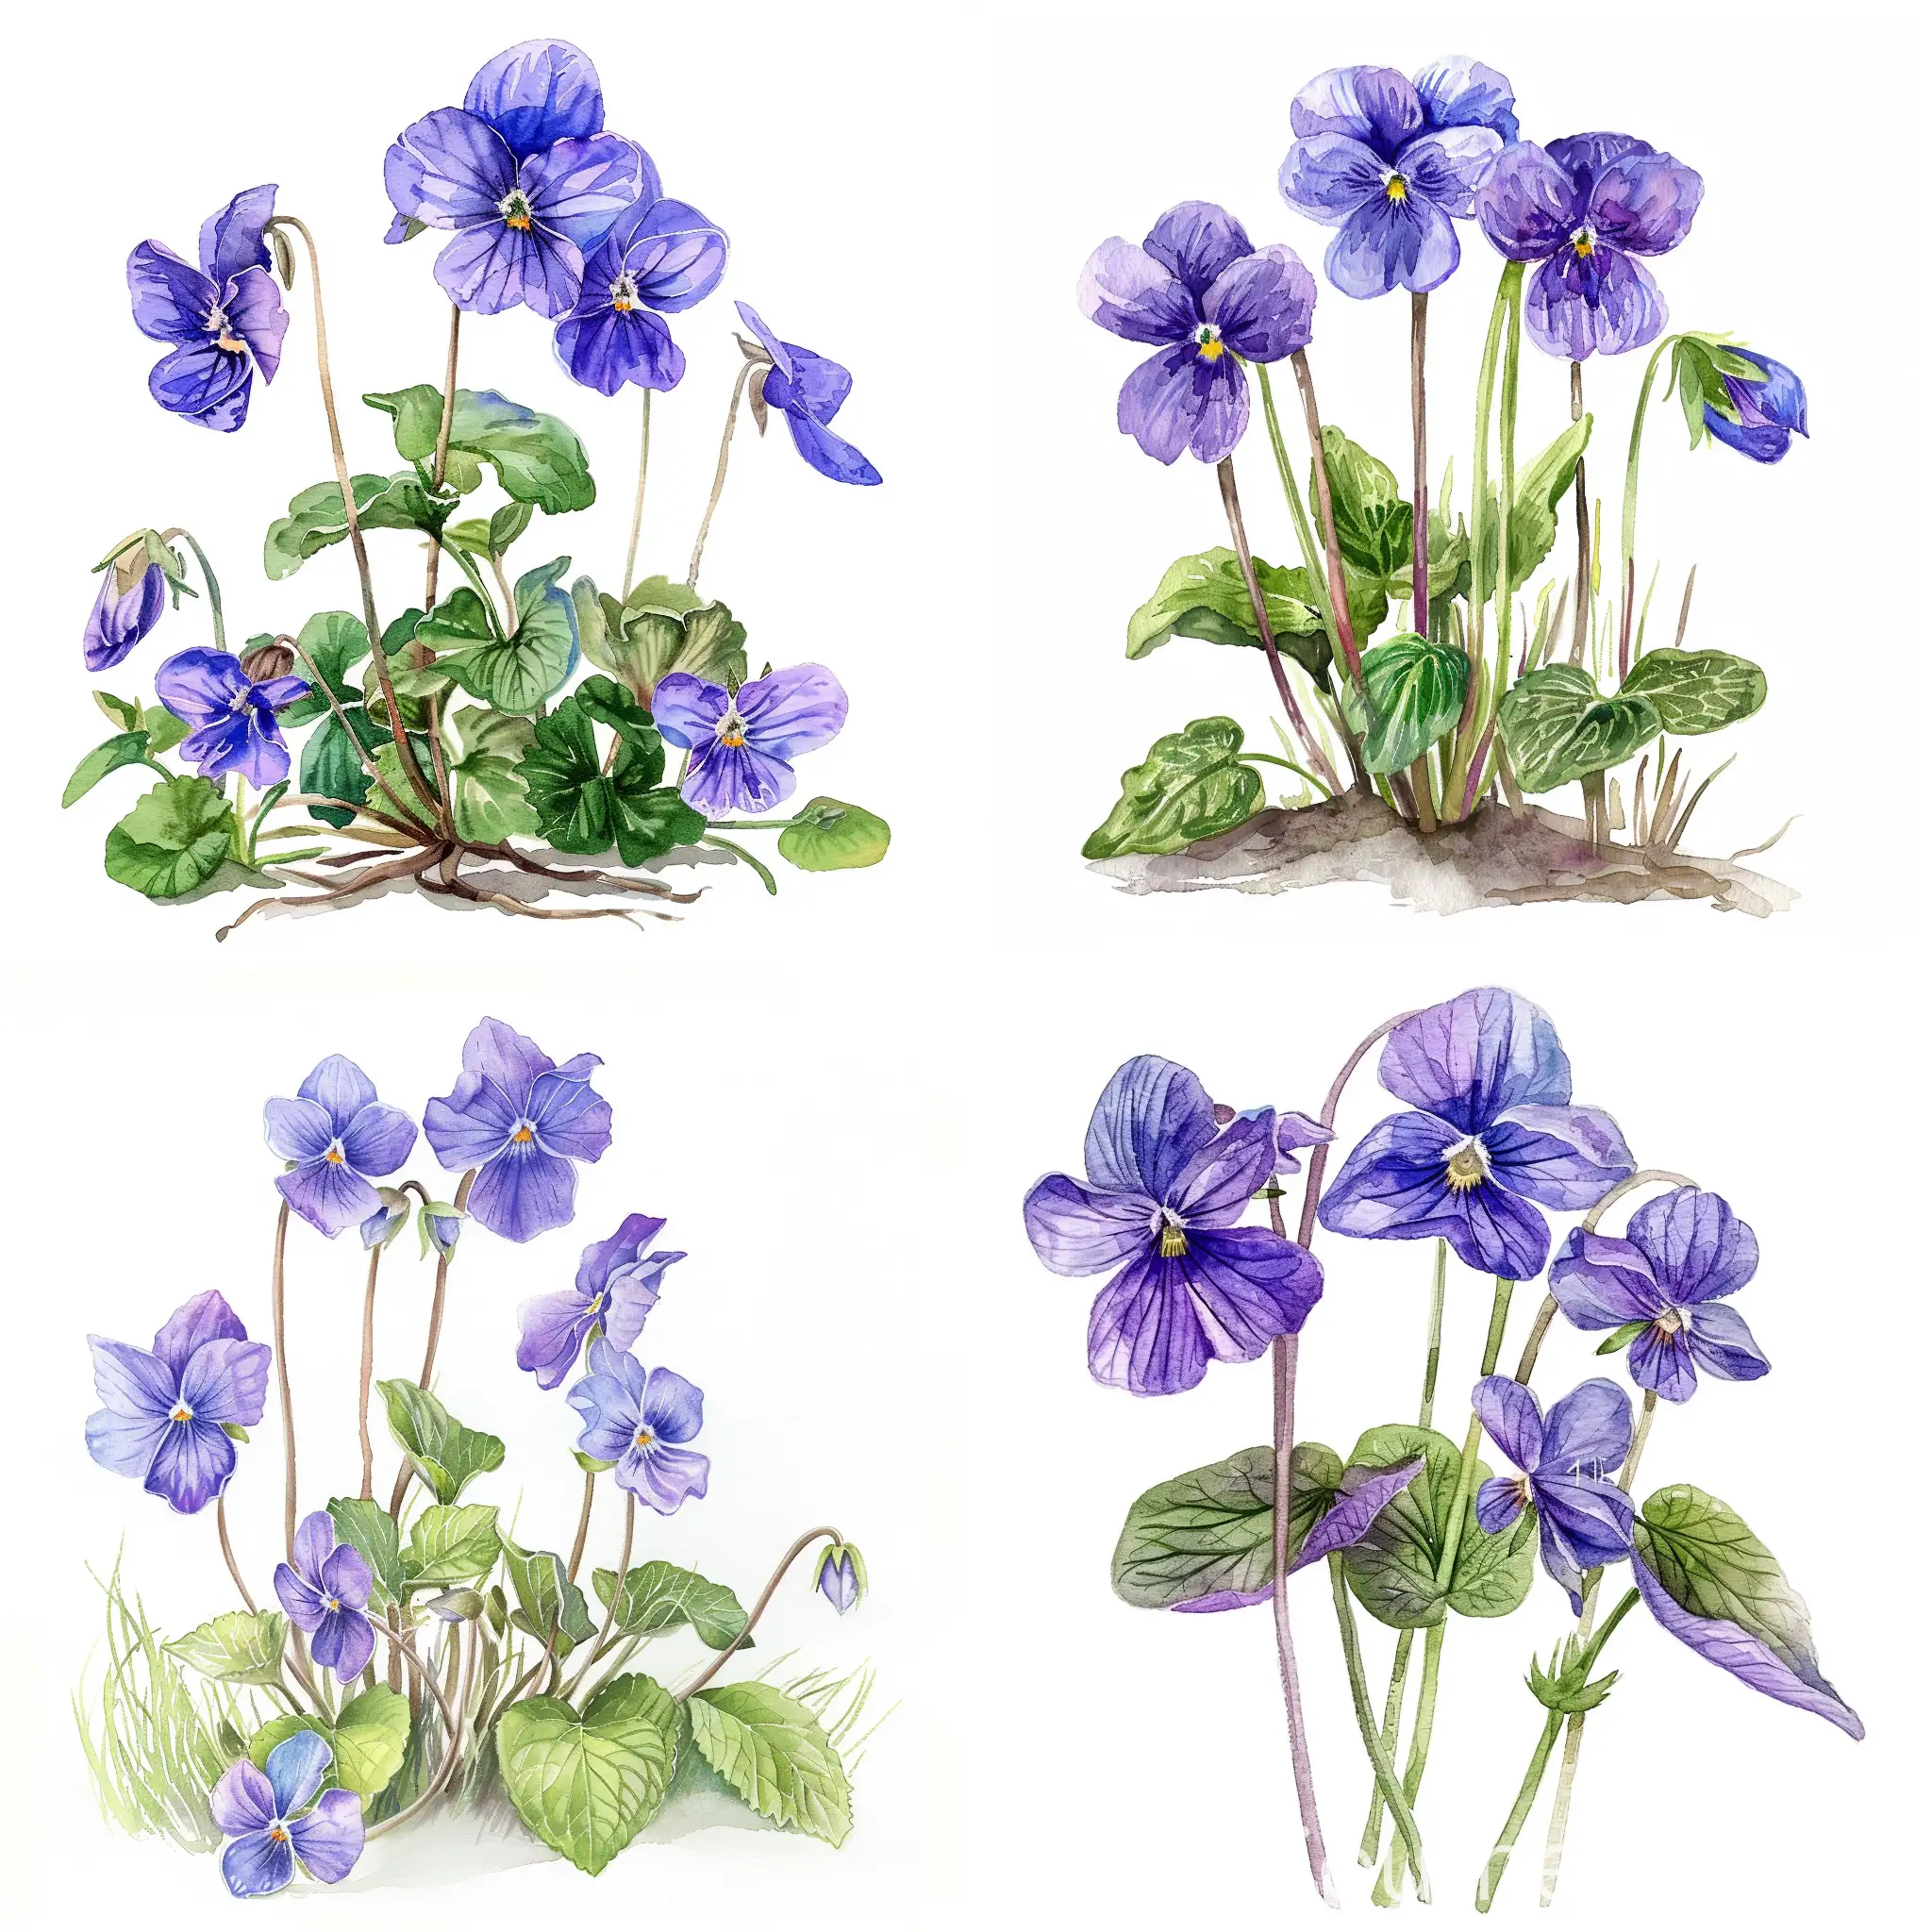 Exquisite-Watercolor-Violets-Detailed-and-Beautiful-Wildflower-Painting-on-White-Background